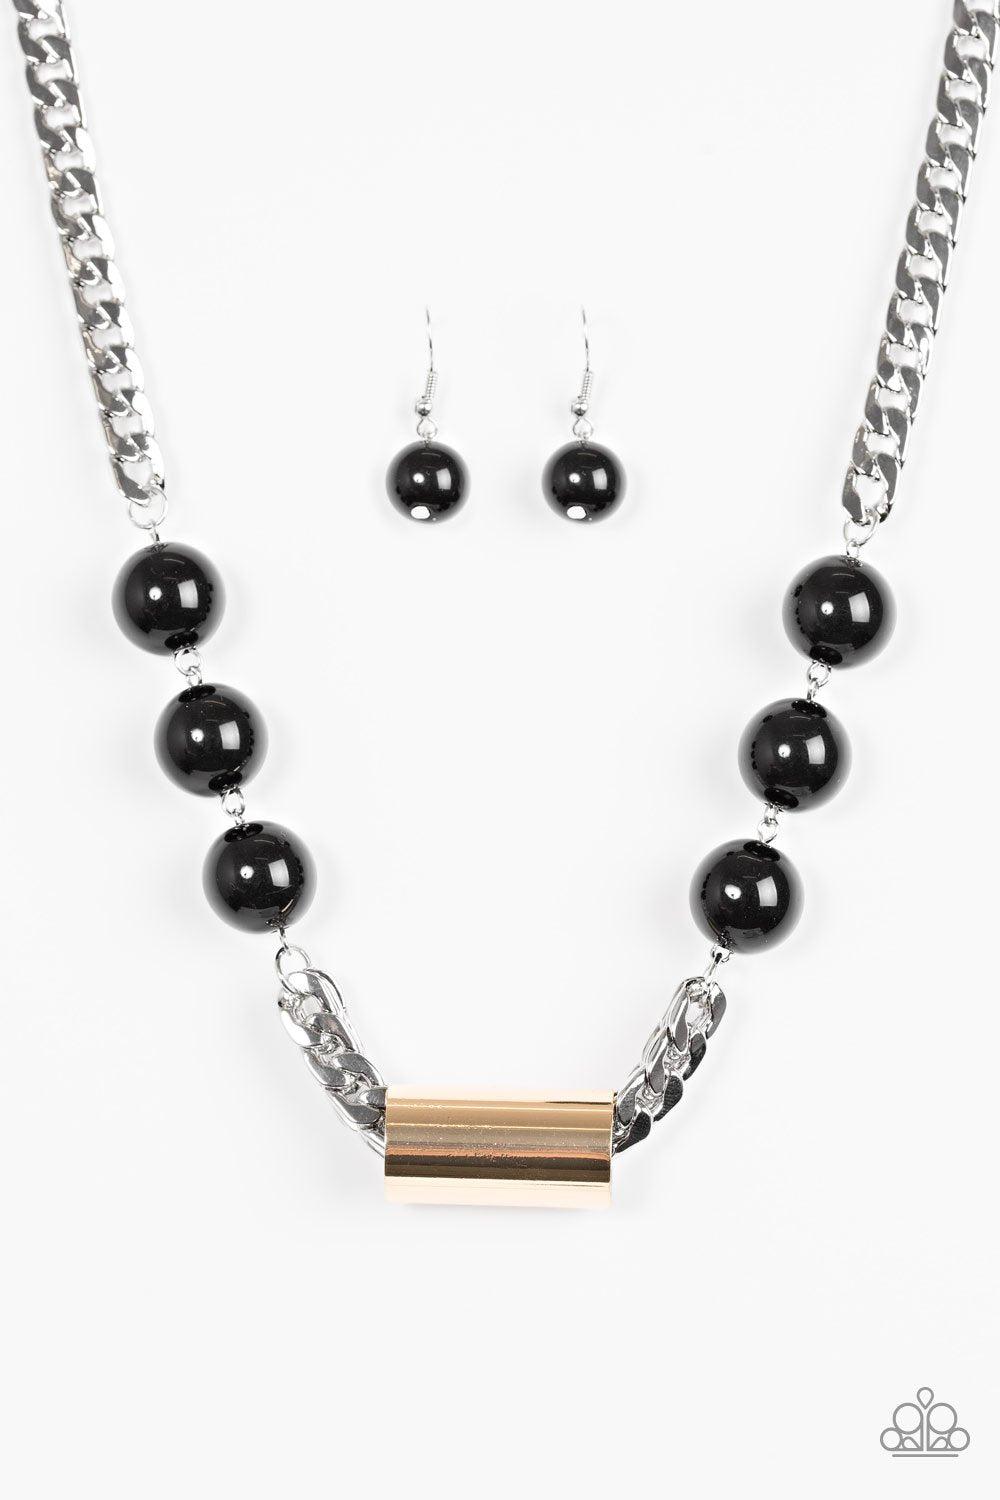 All About Attitude Silver, Gold and Black Bead Necklace - Paparazzi Accessories-CarasShop.com - $5 Jewelry by Cara Jewels